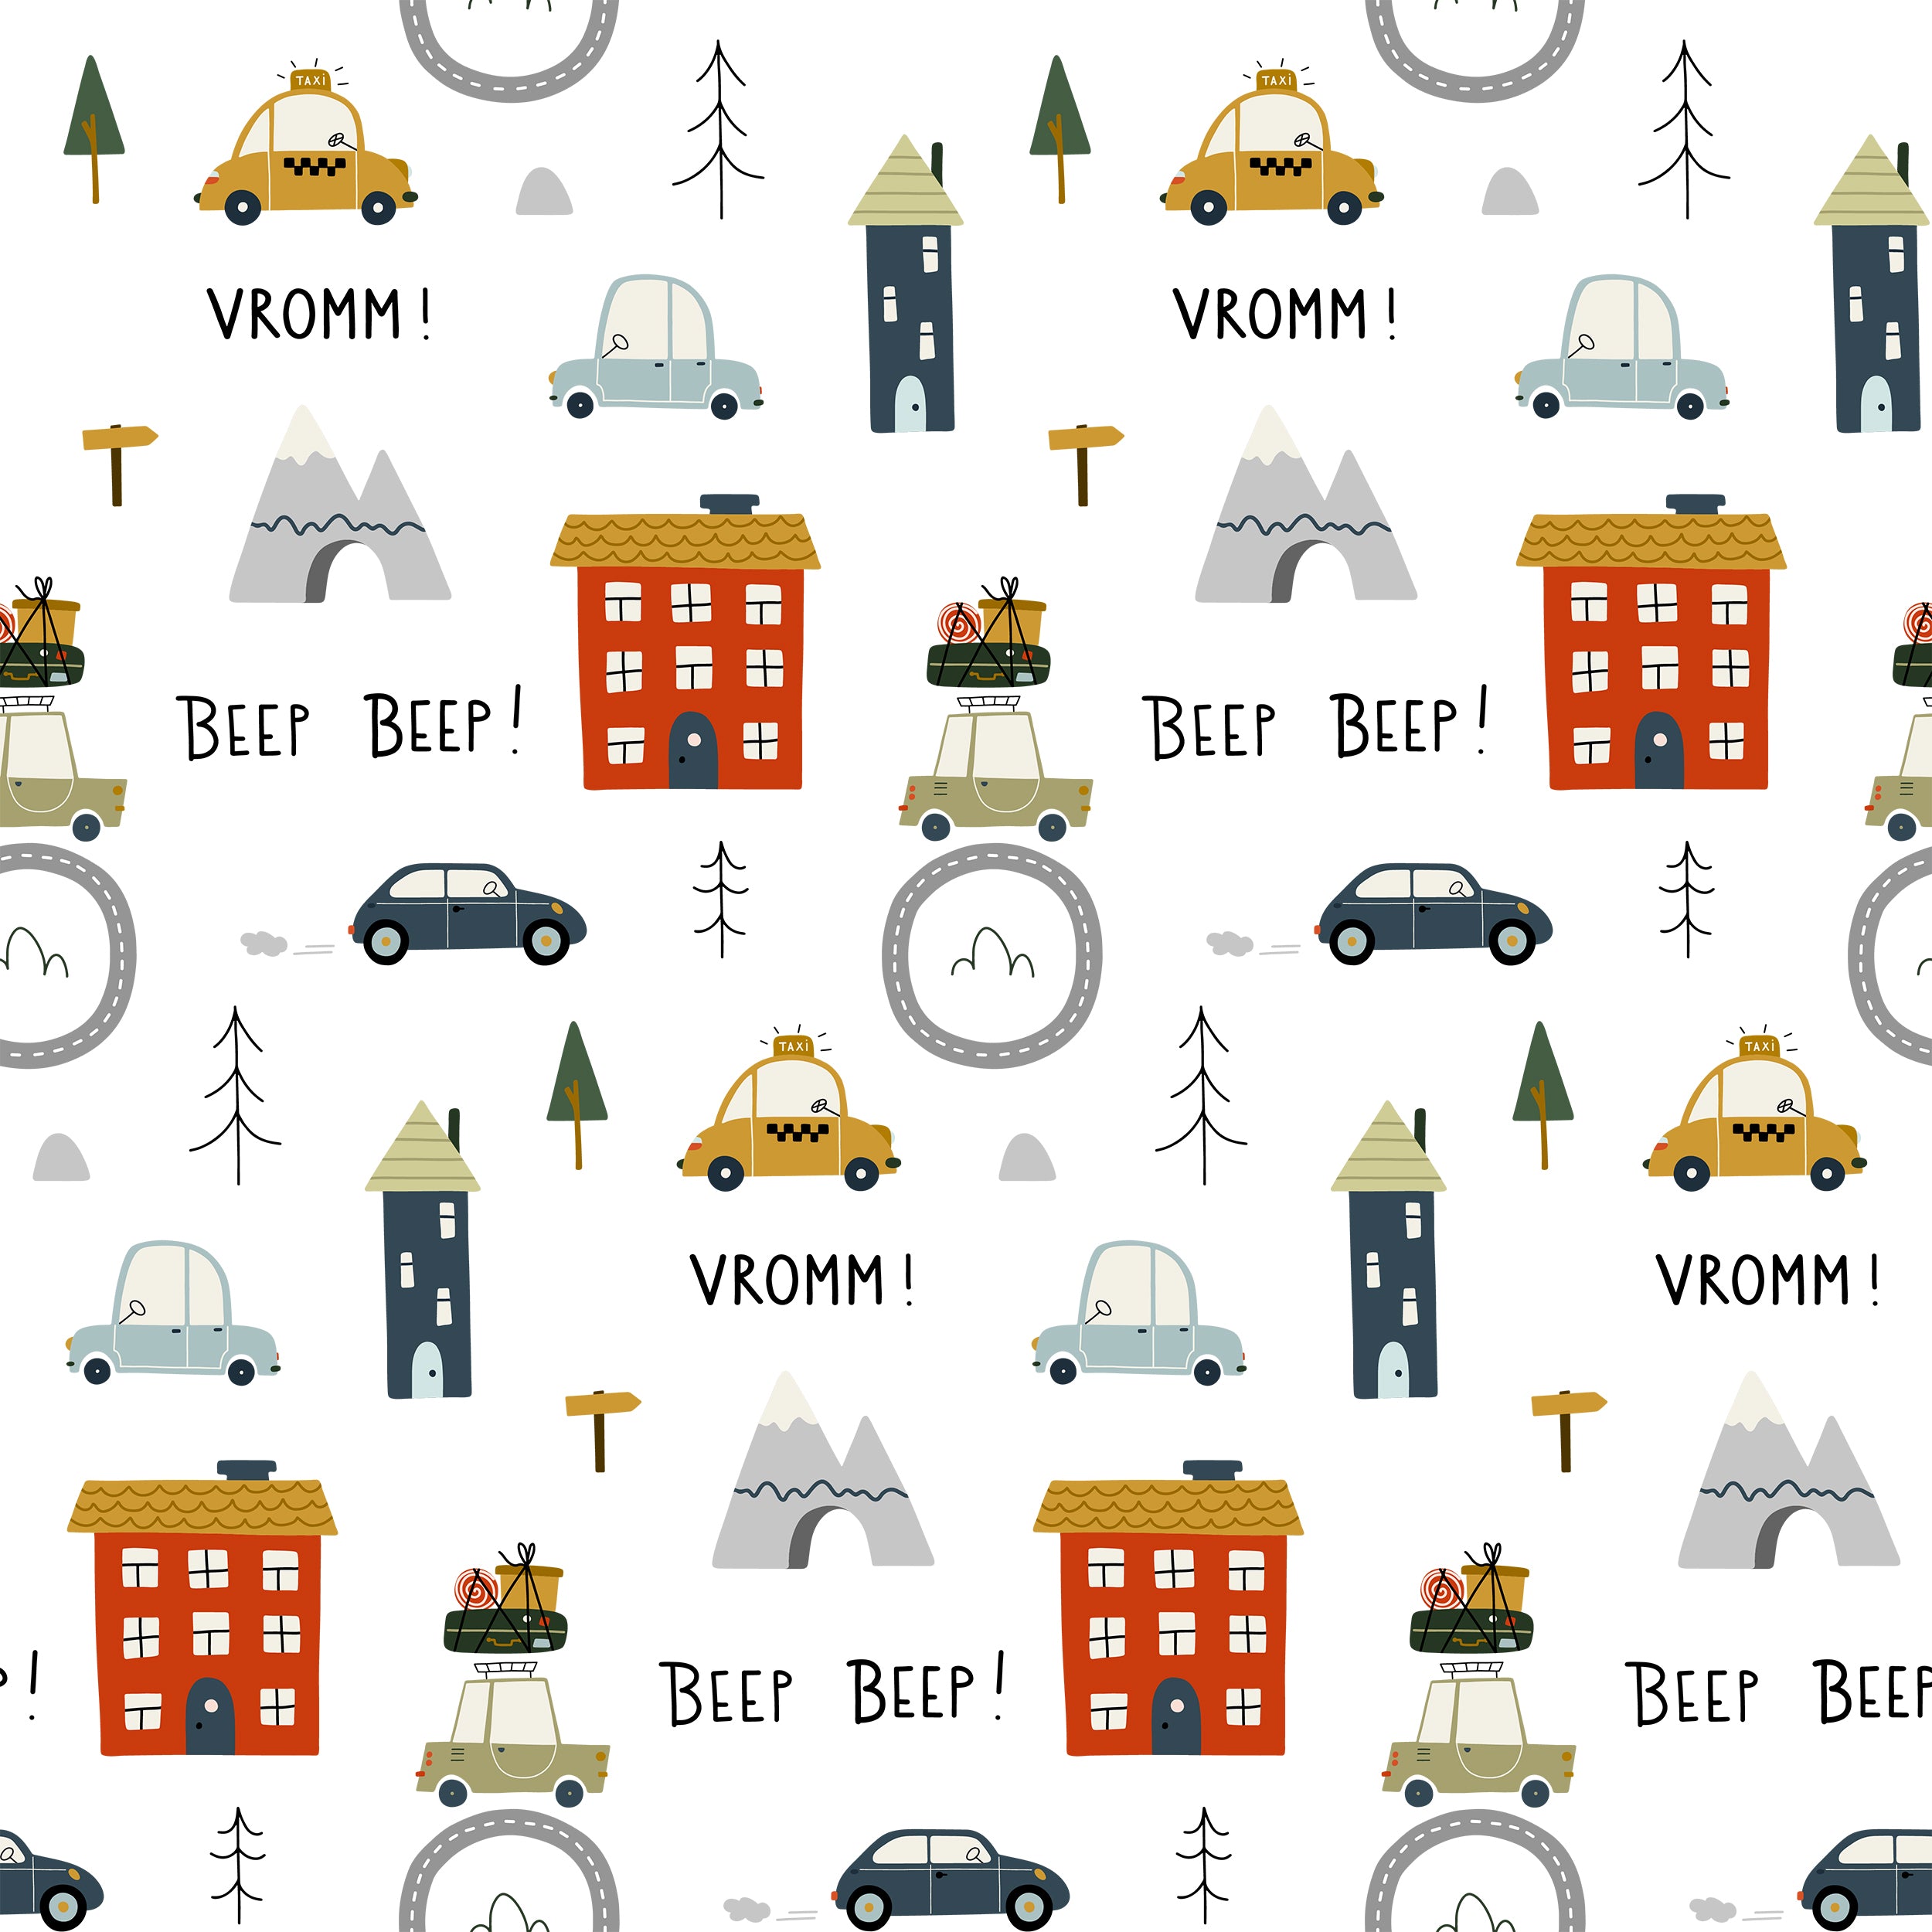 Engaging children's wallpaper featuring a variety of cartoon-style vehicles such as police cars, ambulances, and taxis, each driven by a different animal character against a backdrop with road signs, trees, and clouds